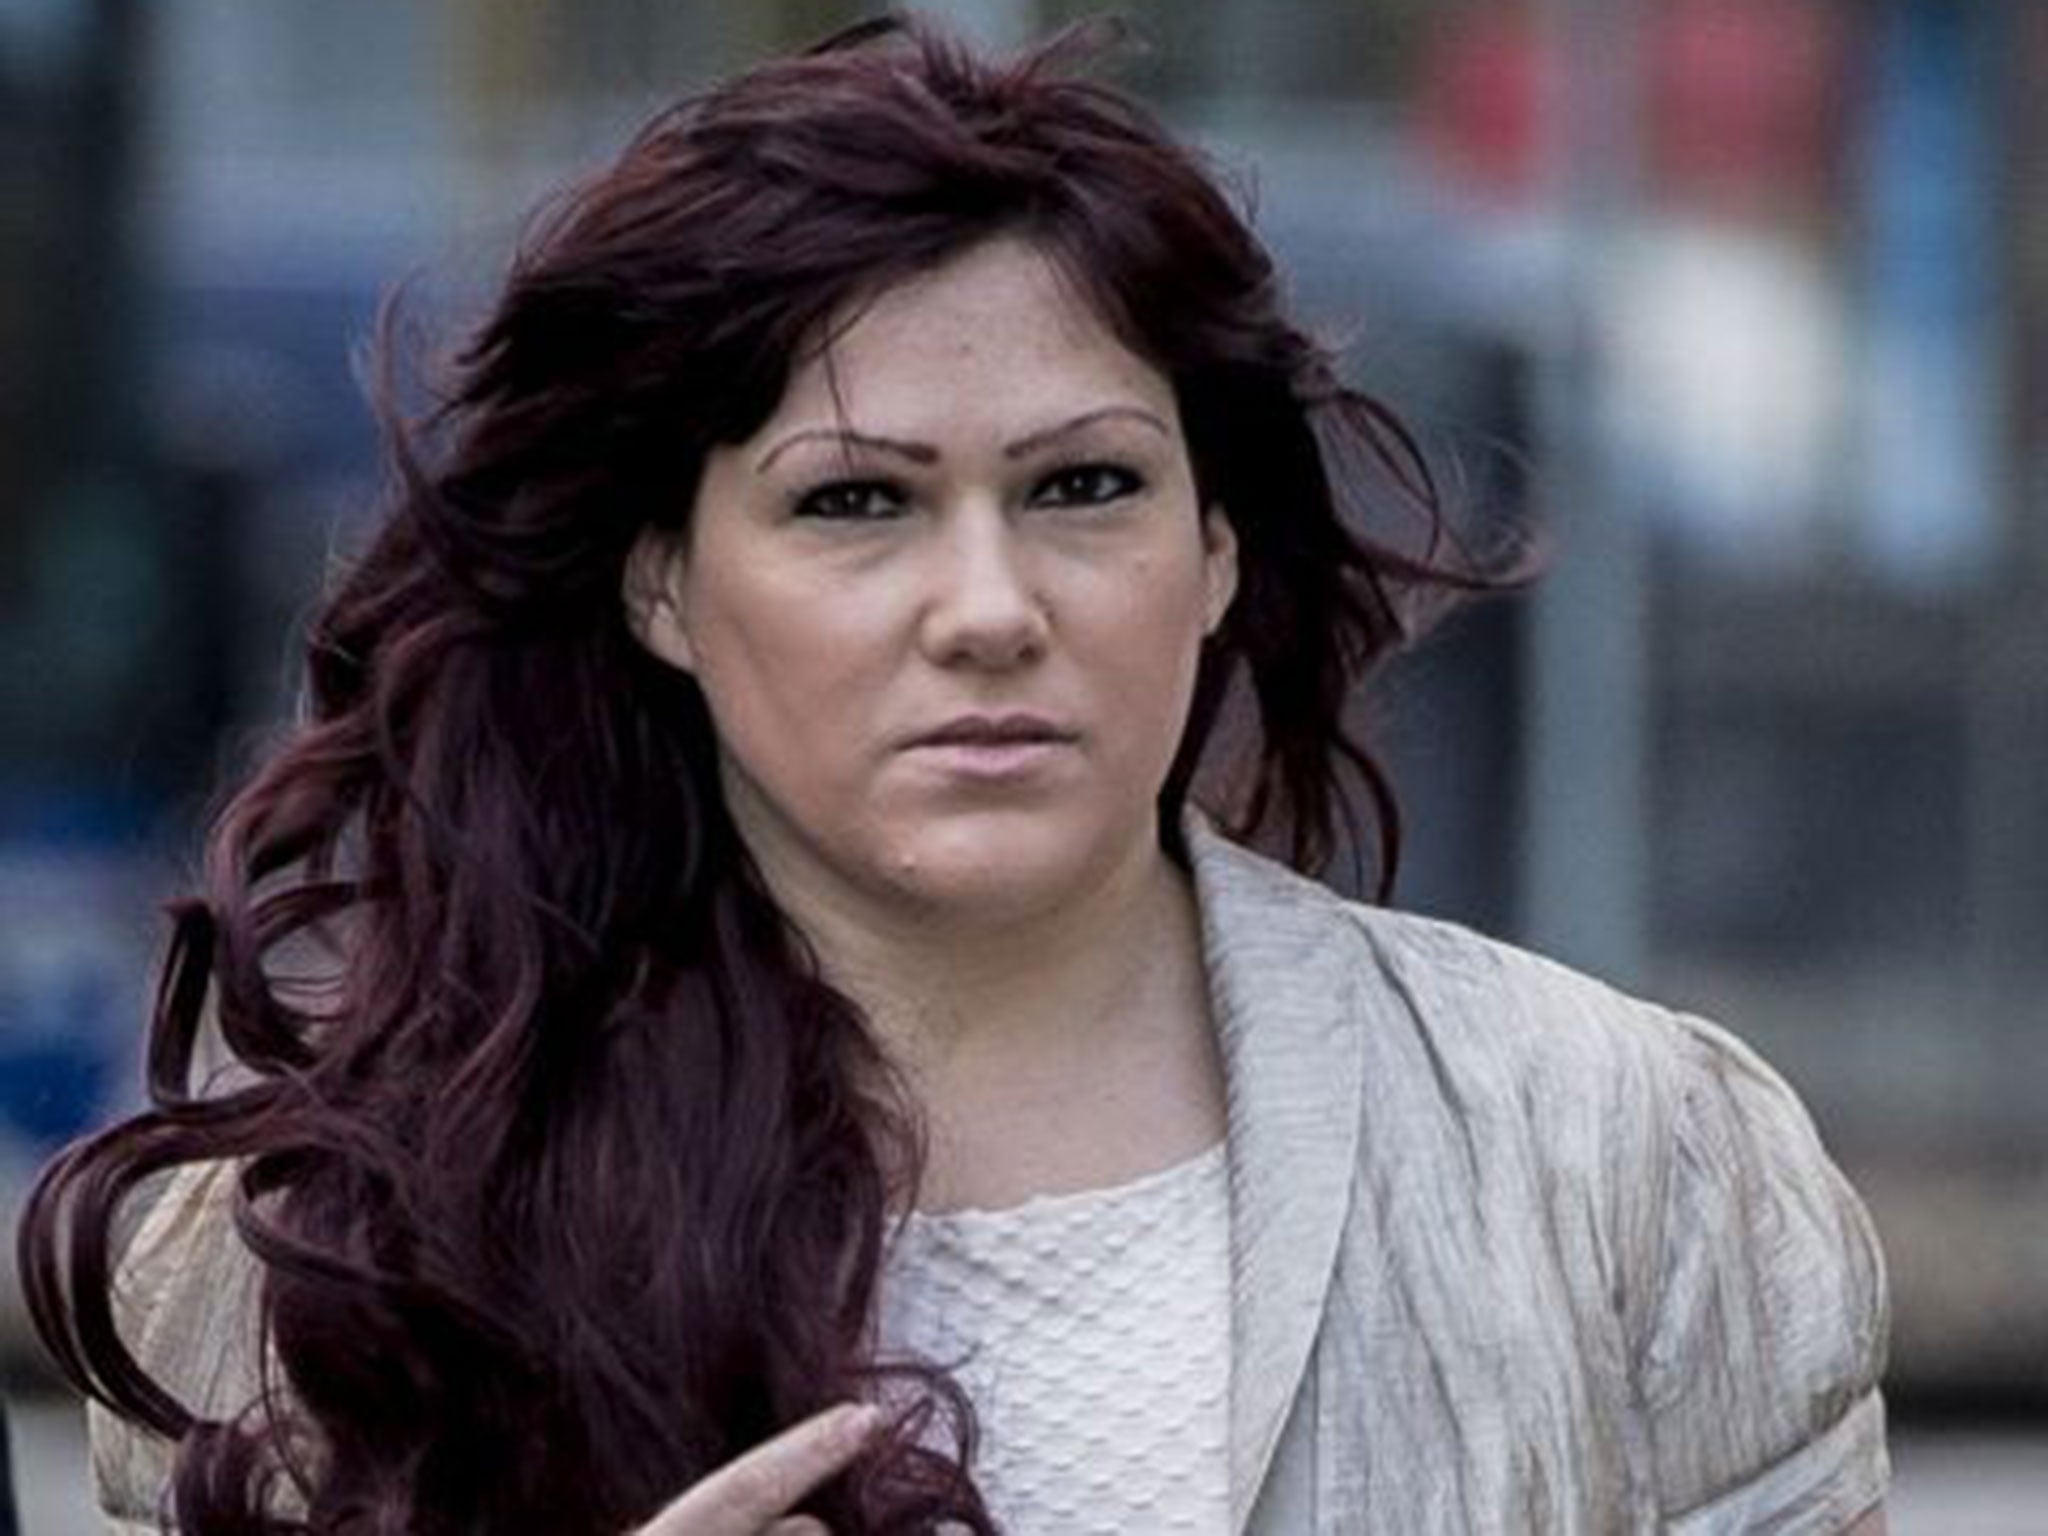 Ian Watkins trial Singers ex-girlfriend Joanne Mjadzelics took mother of baby he wanted to rape to police, court told The Independent The Independent image photo